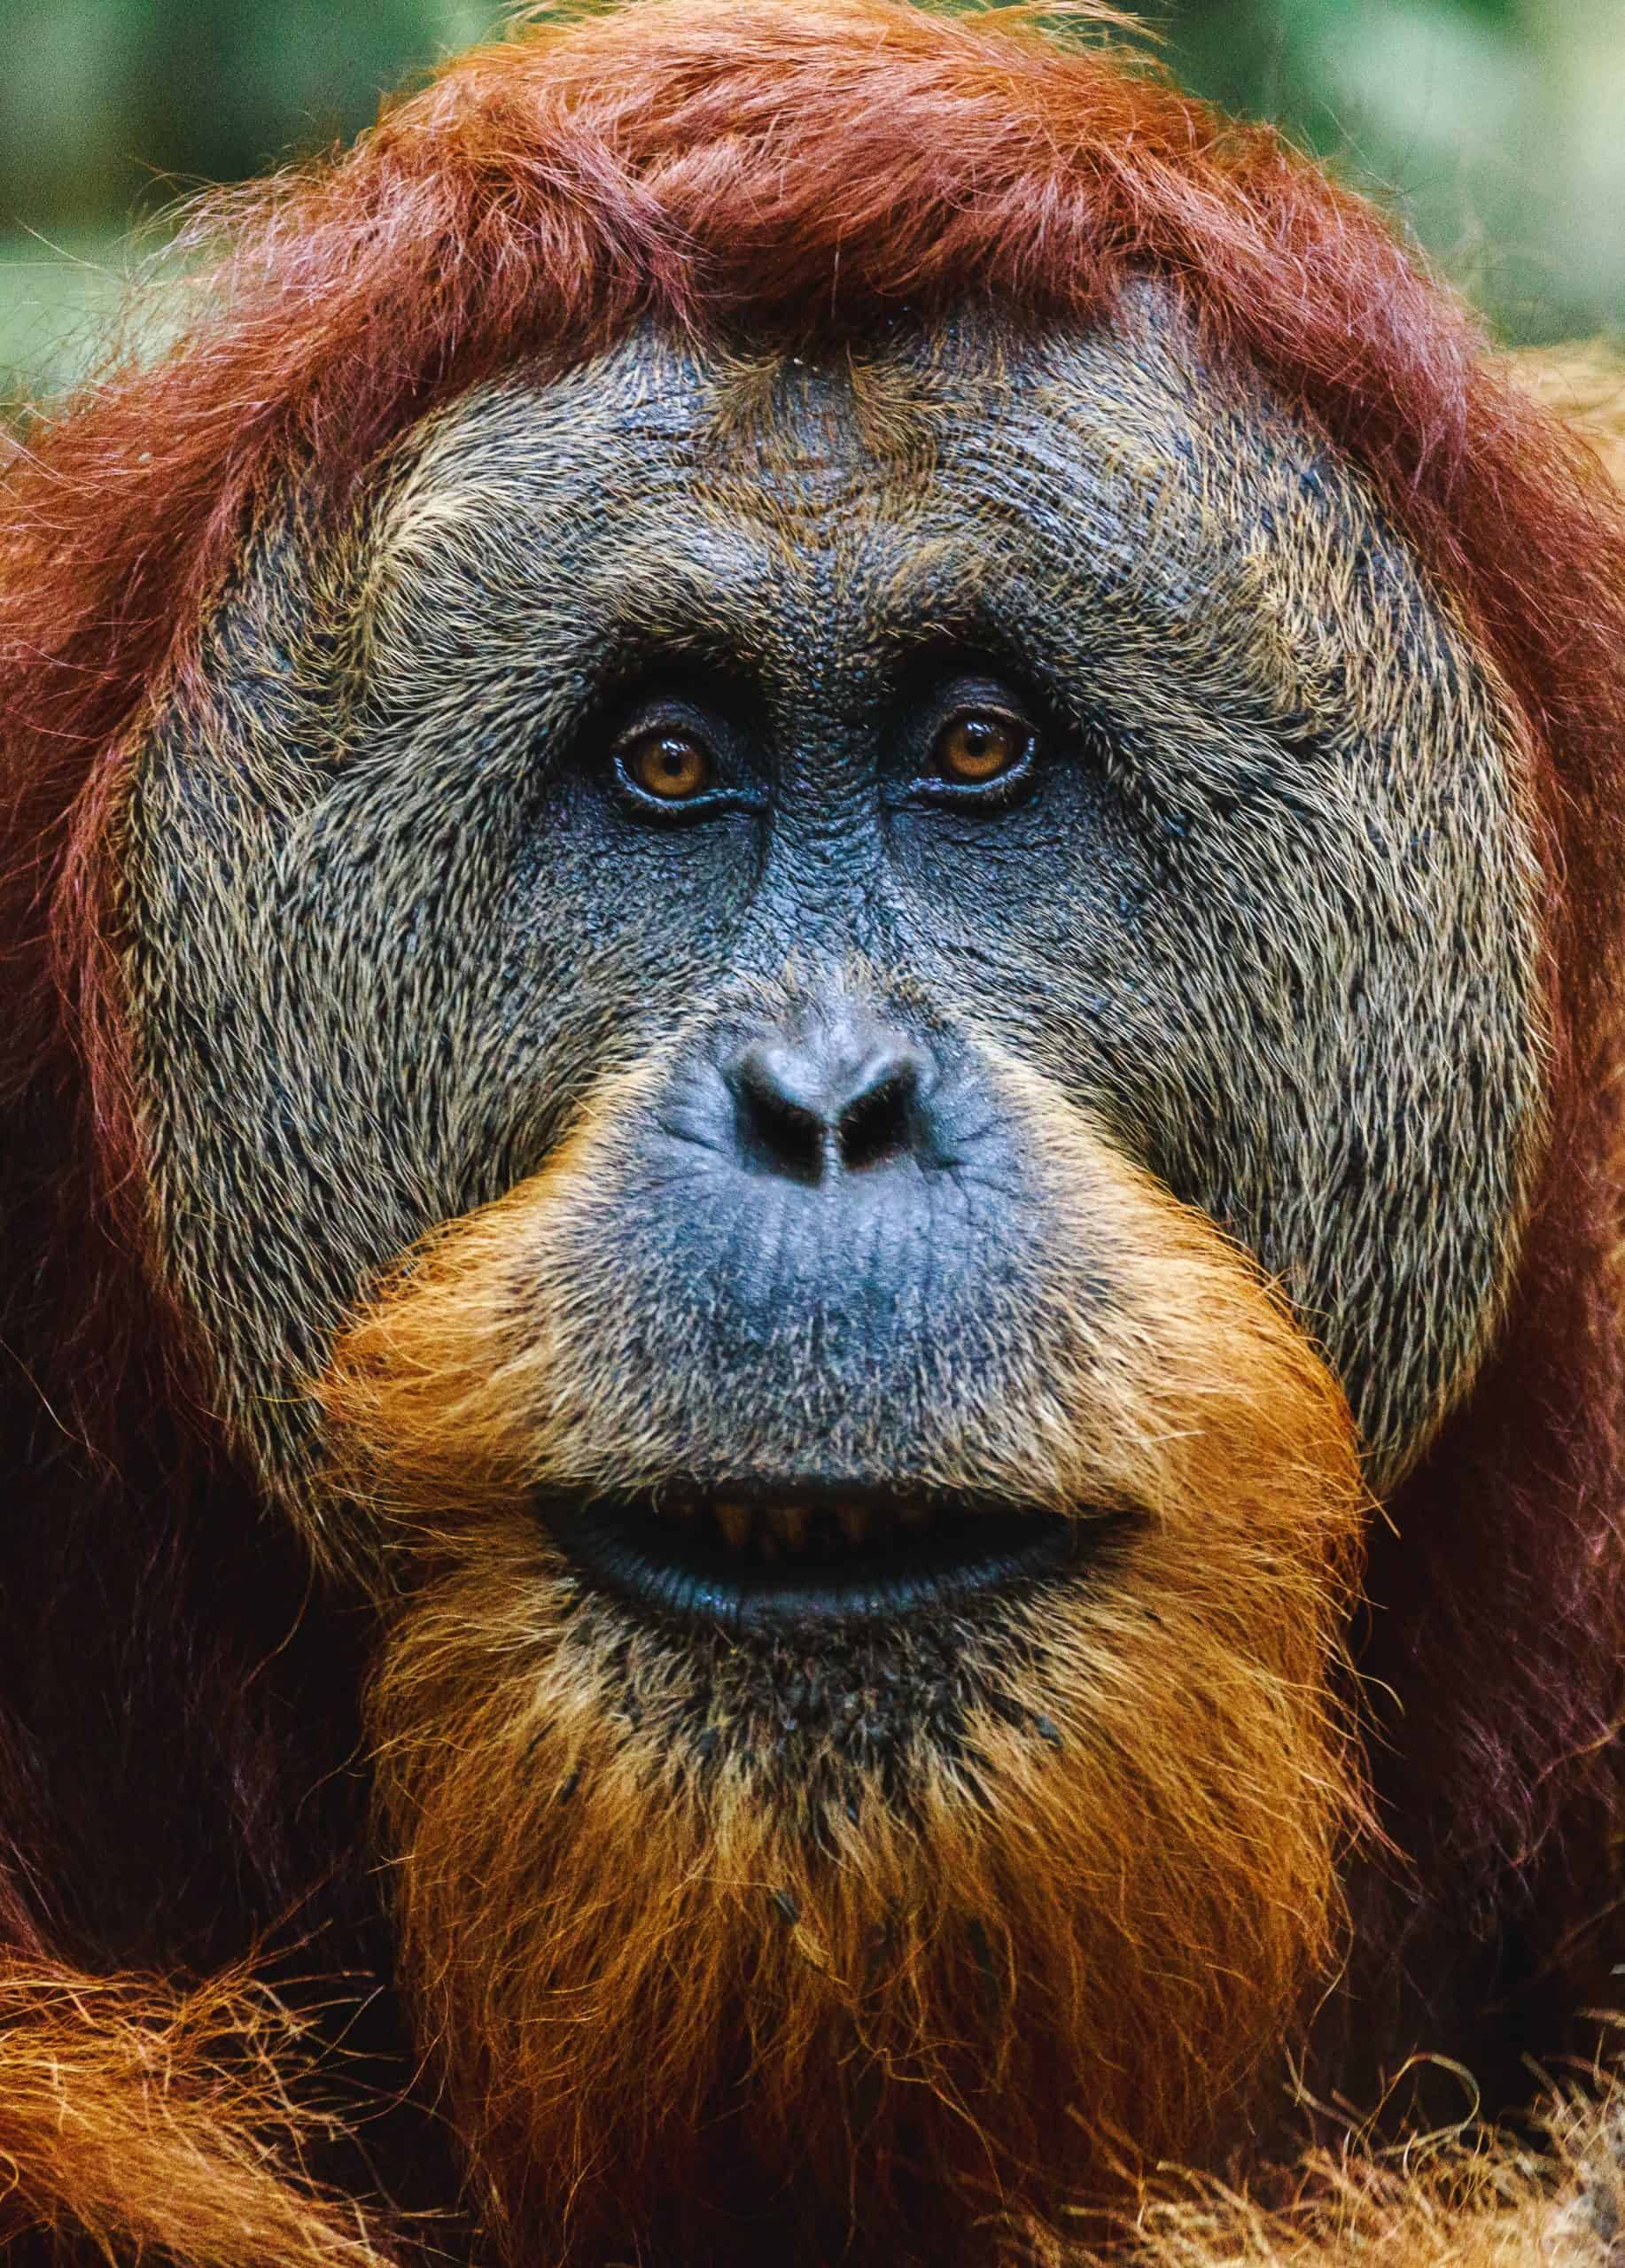 Palm Oil Deforestation: A Threat to Orangutan Populations, Indigenous People and Biodiversity